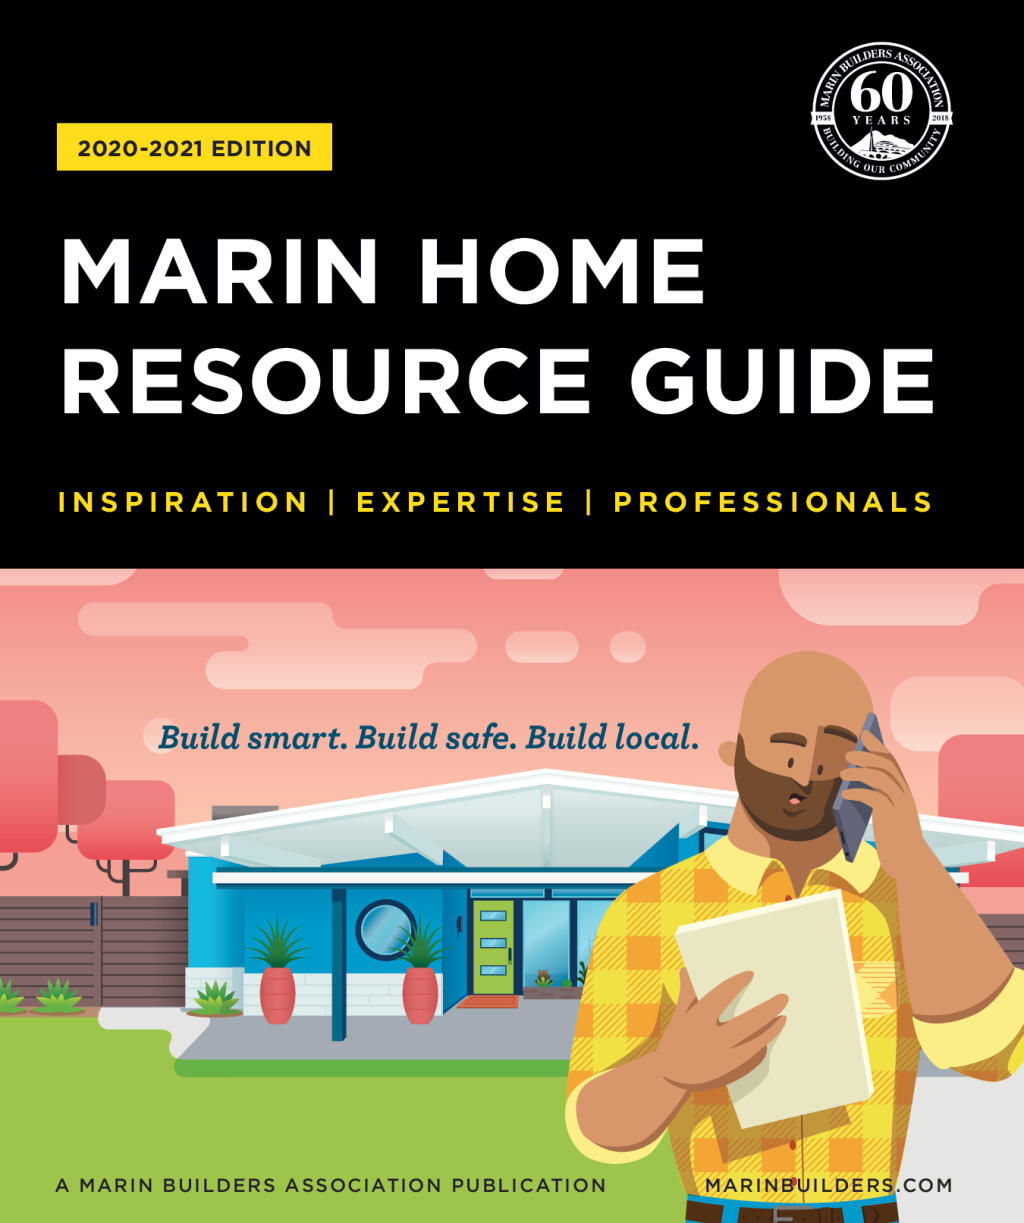 The 2020-2021 Marin Builders Association Home Resource Guide focuses on local needs and home improvement ideas for building smart and safe housing in the county. The current issue includes articles focusing on how to prepare for power outages; working toward a fire-resistant future; hardscape solutions; new ADU laws; proactive home stewardship yields high ROI; meet the professionals and a complete MBA member directory. (Courtesy of Marin Builders Association)